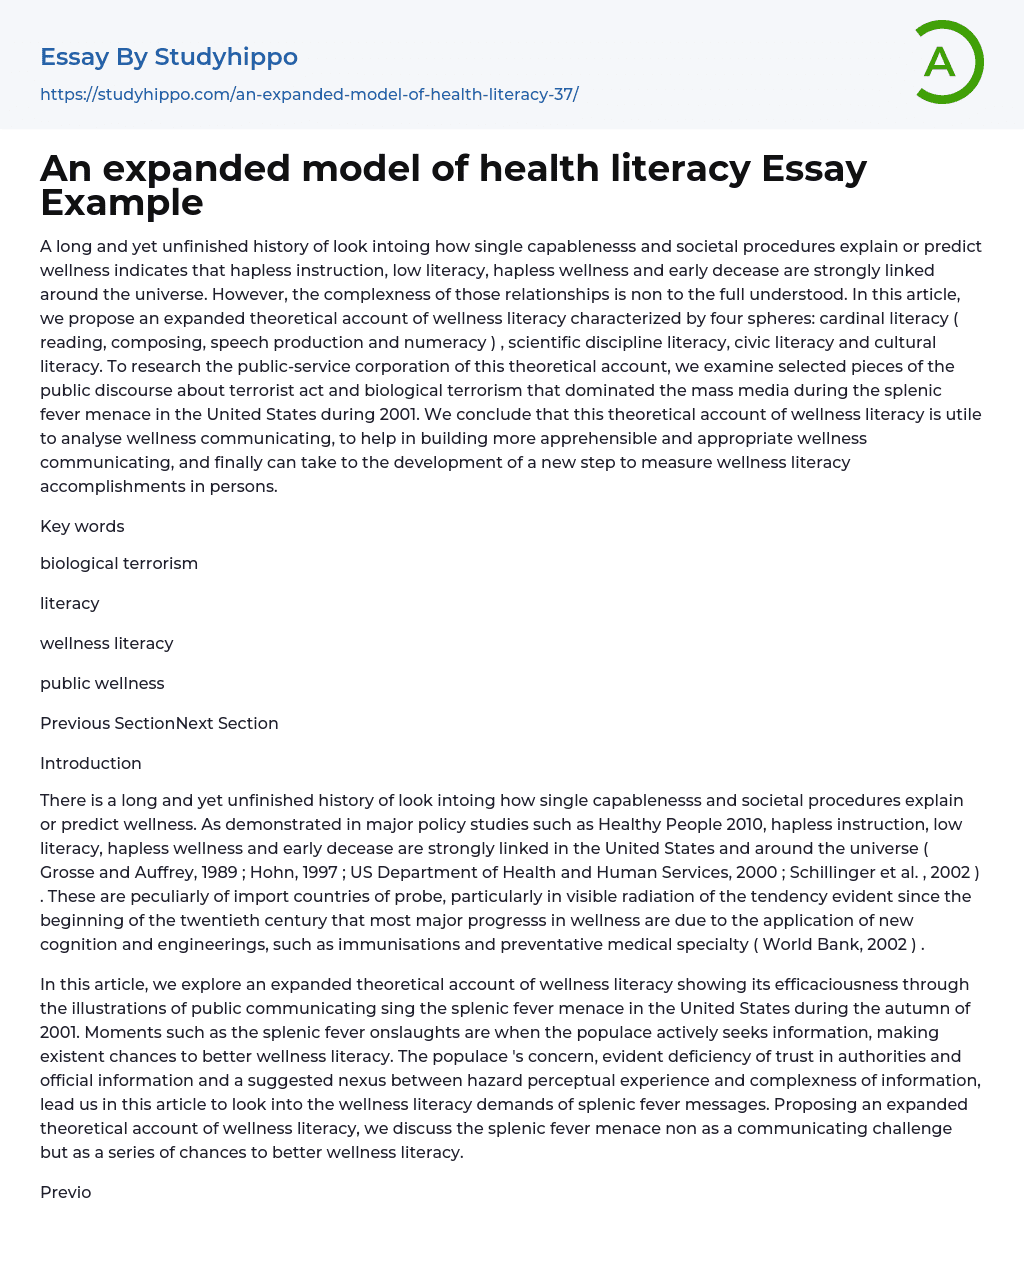 An expanded model of health literacy Essay Example